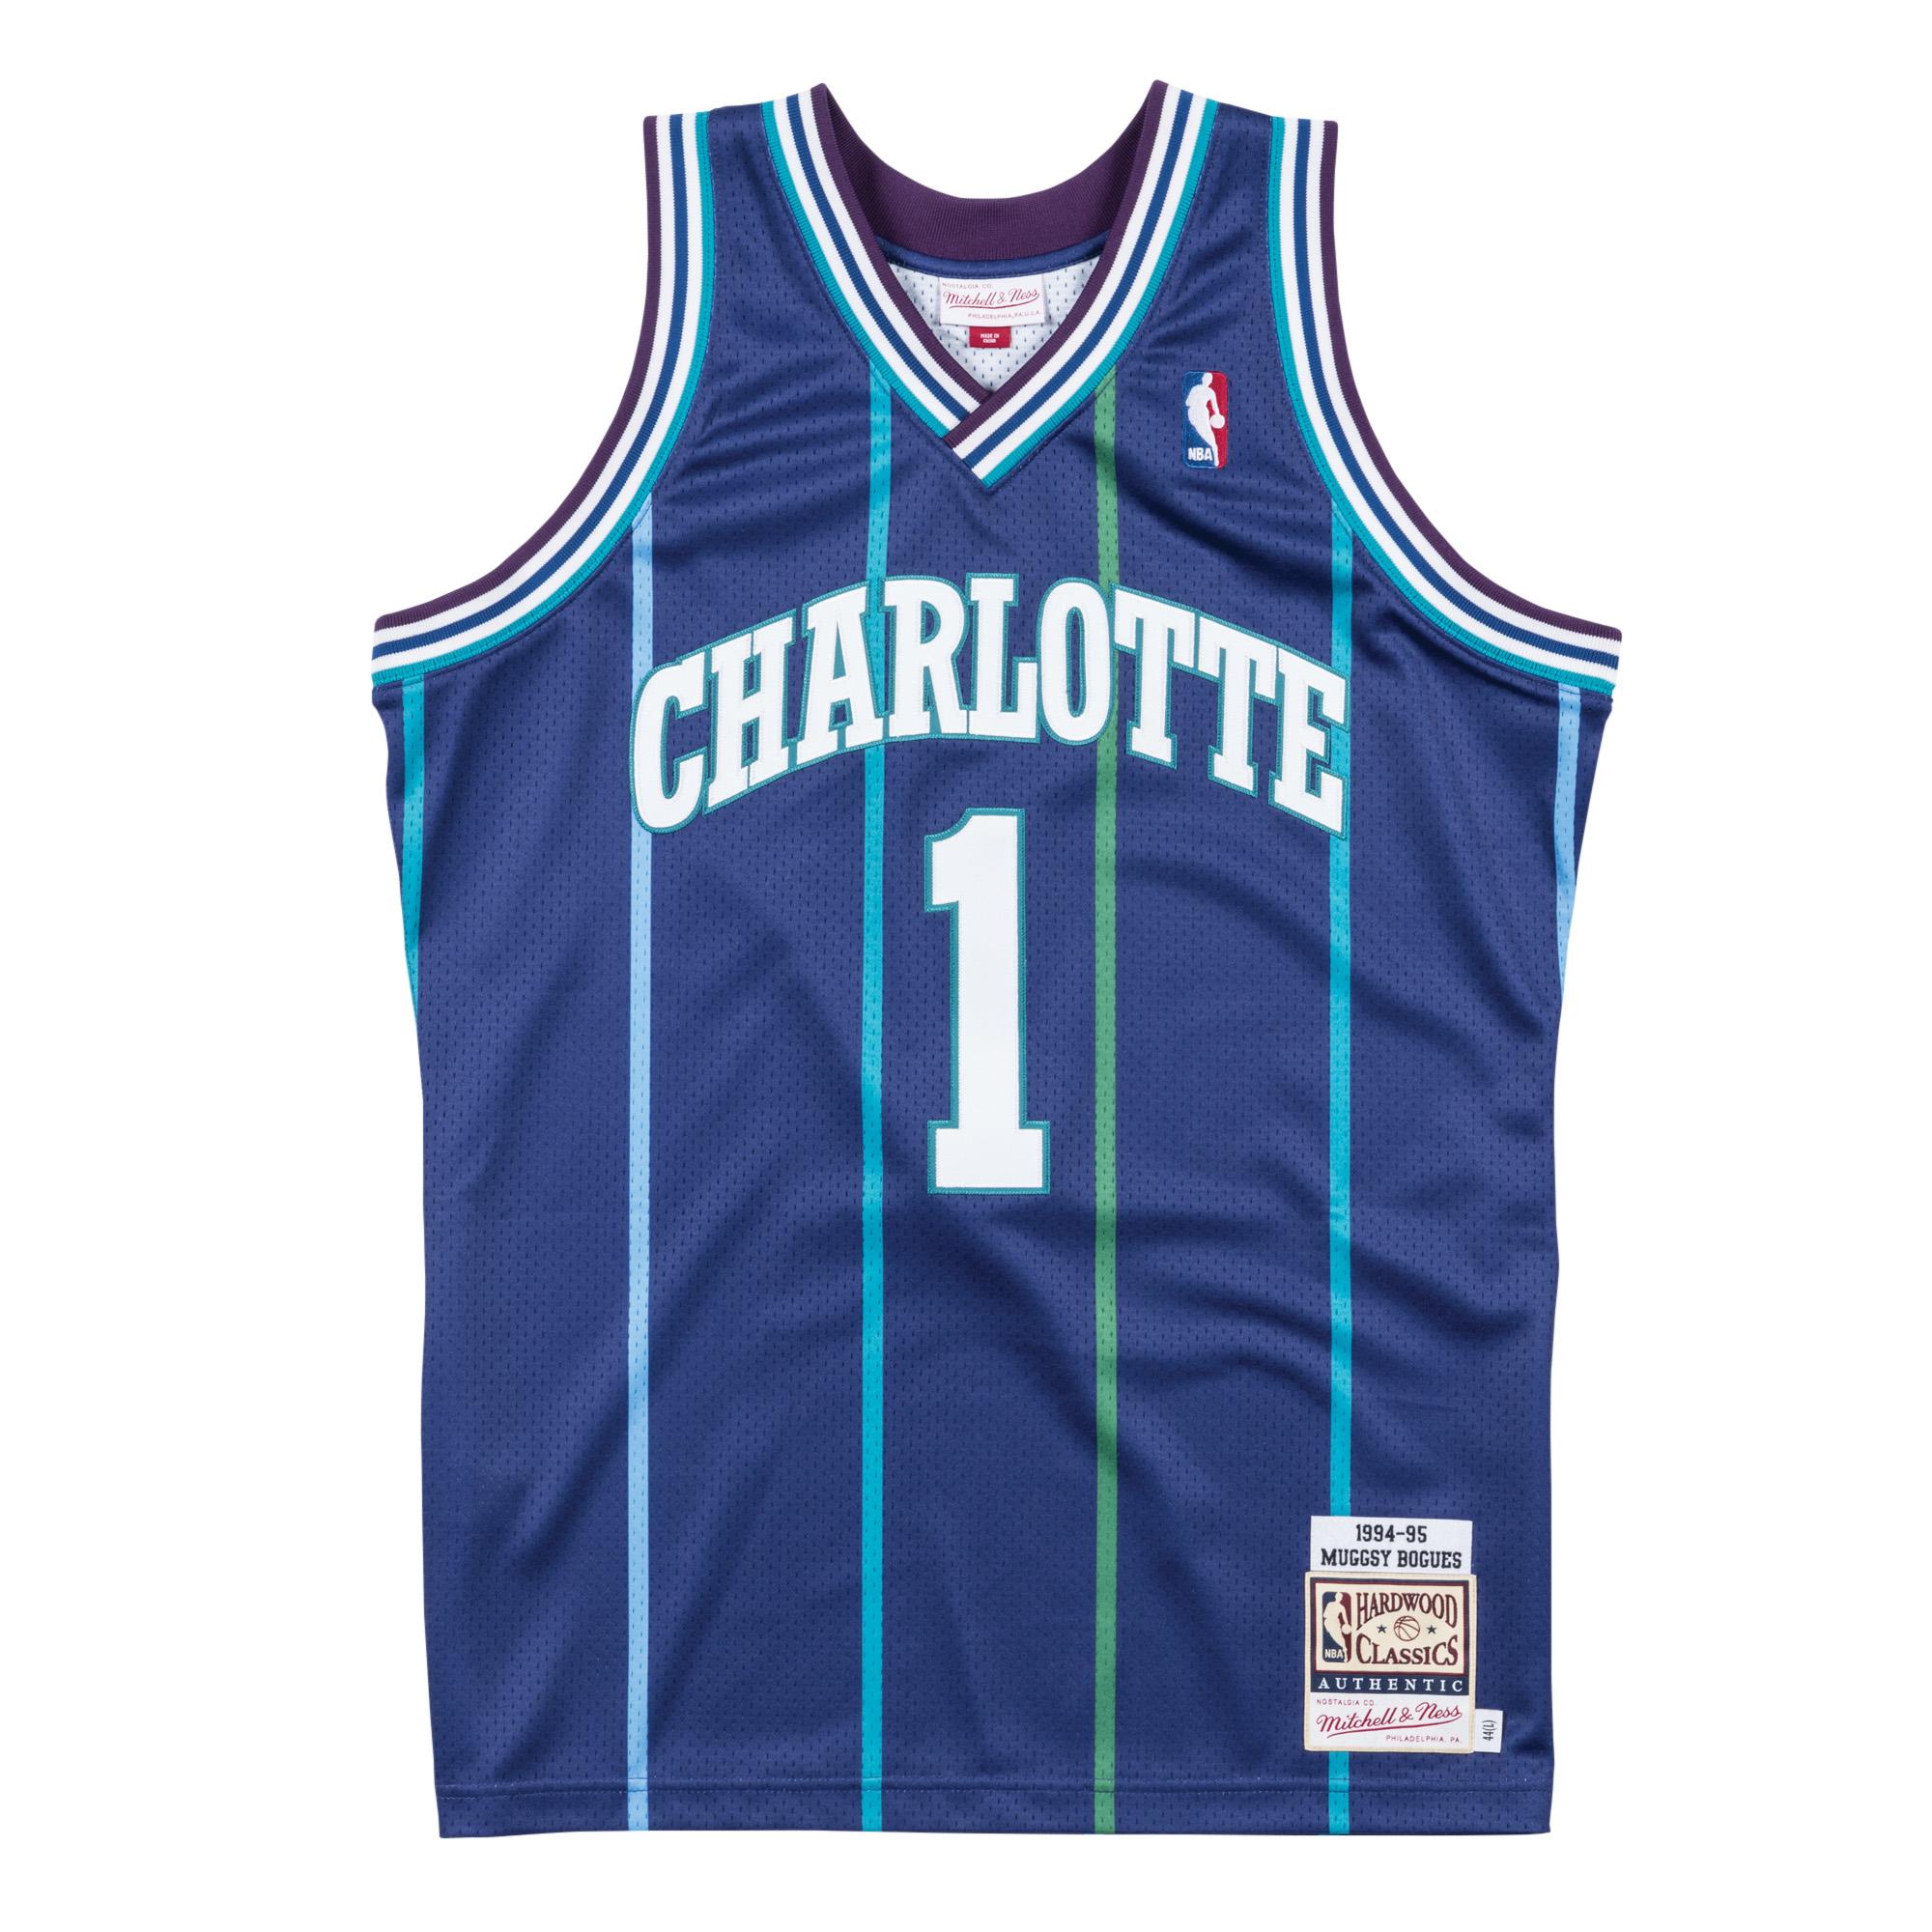 Mitchell & Ness | Muggsy Bogues 1994-95 Alternate Charlotte Hornets Authentic Jersey